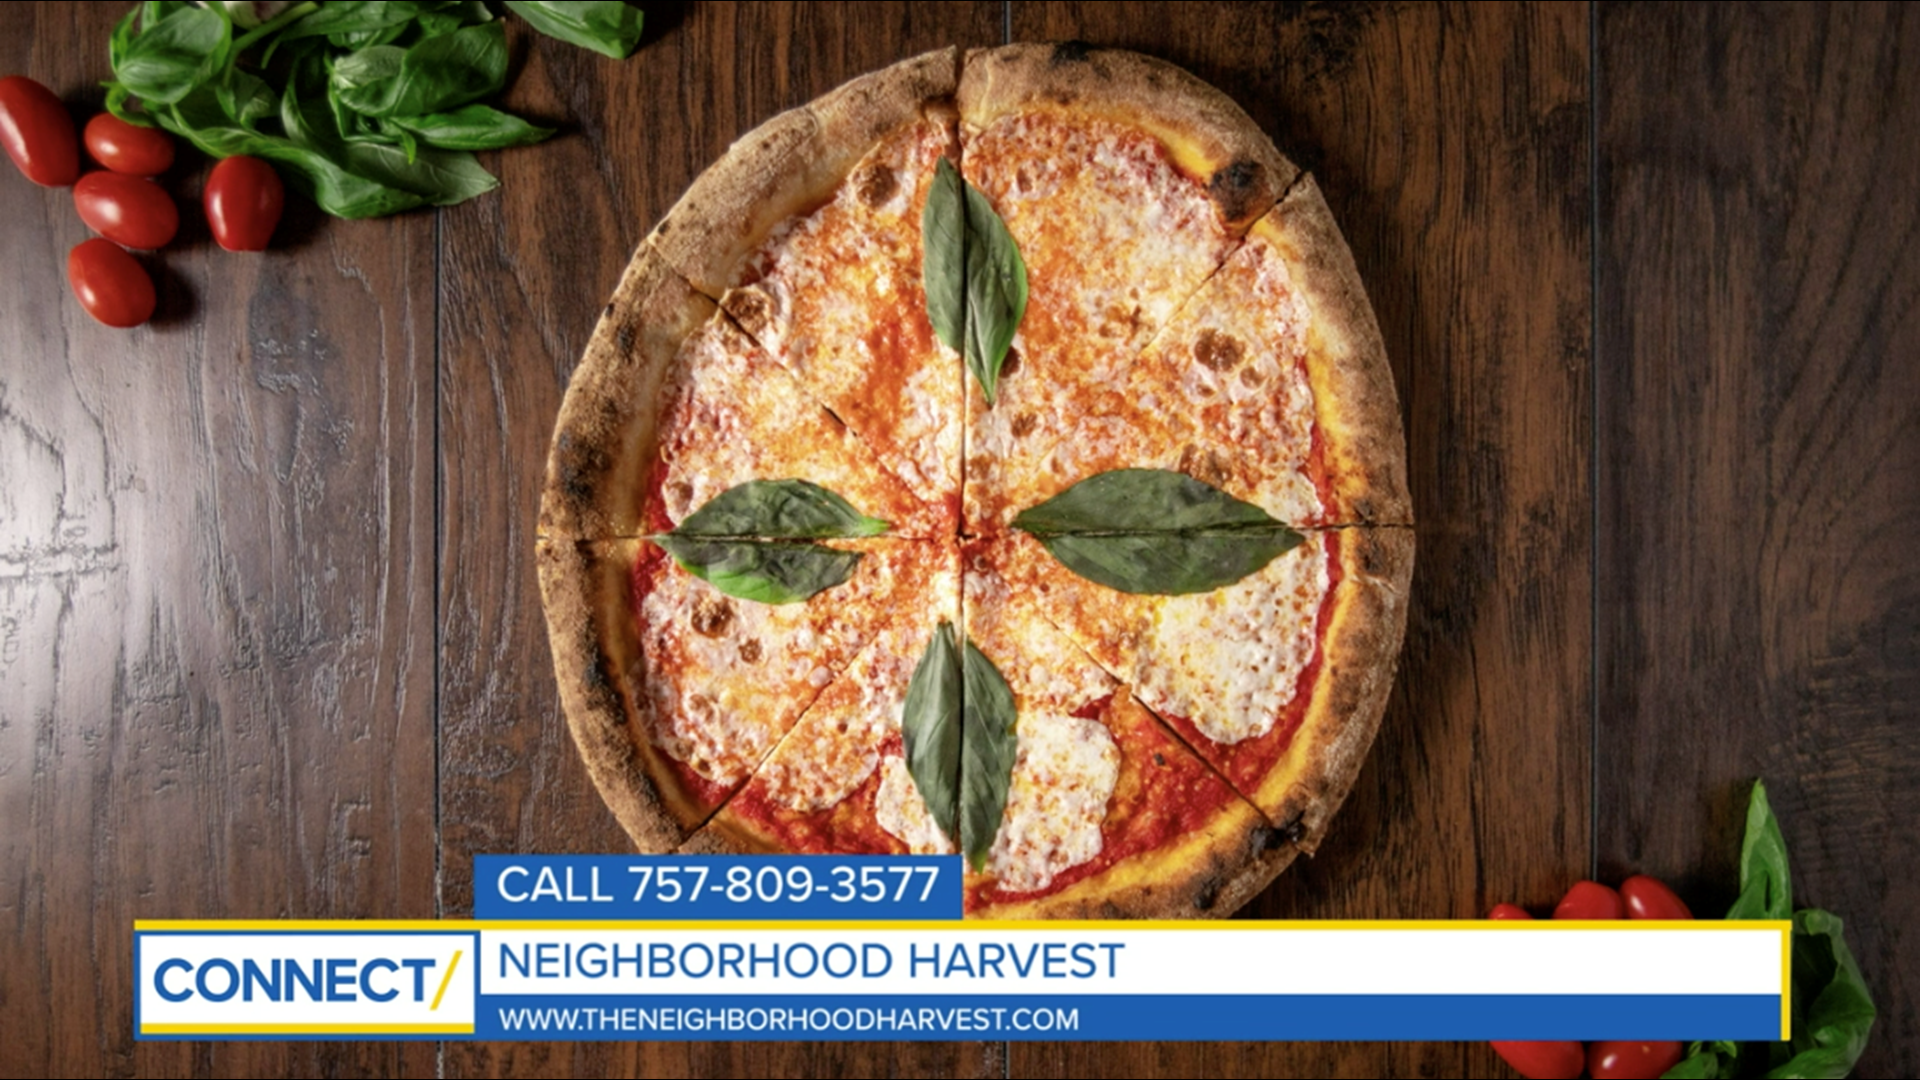 It's hard get lunch together when juggling so much at home. The Neighborhood Harvest delivers fresh meals to your doorstep. Sign up for free with promo code CONNECT!